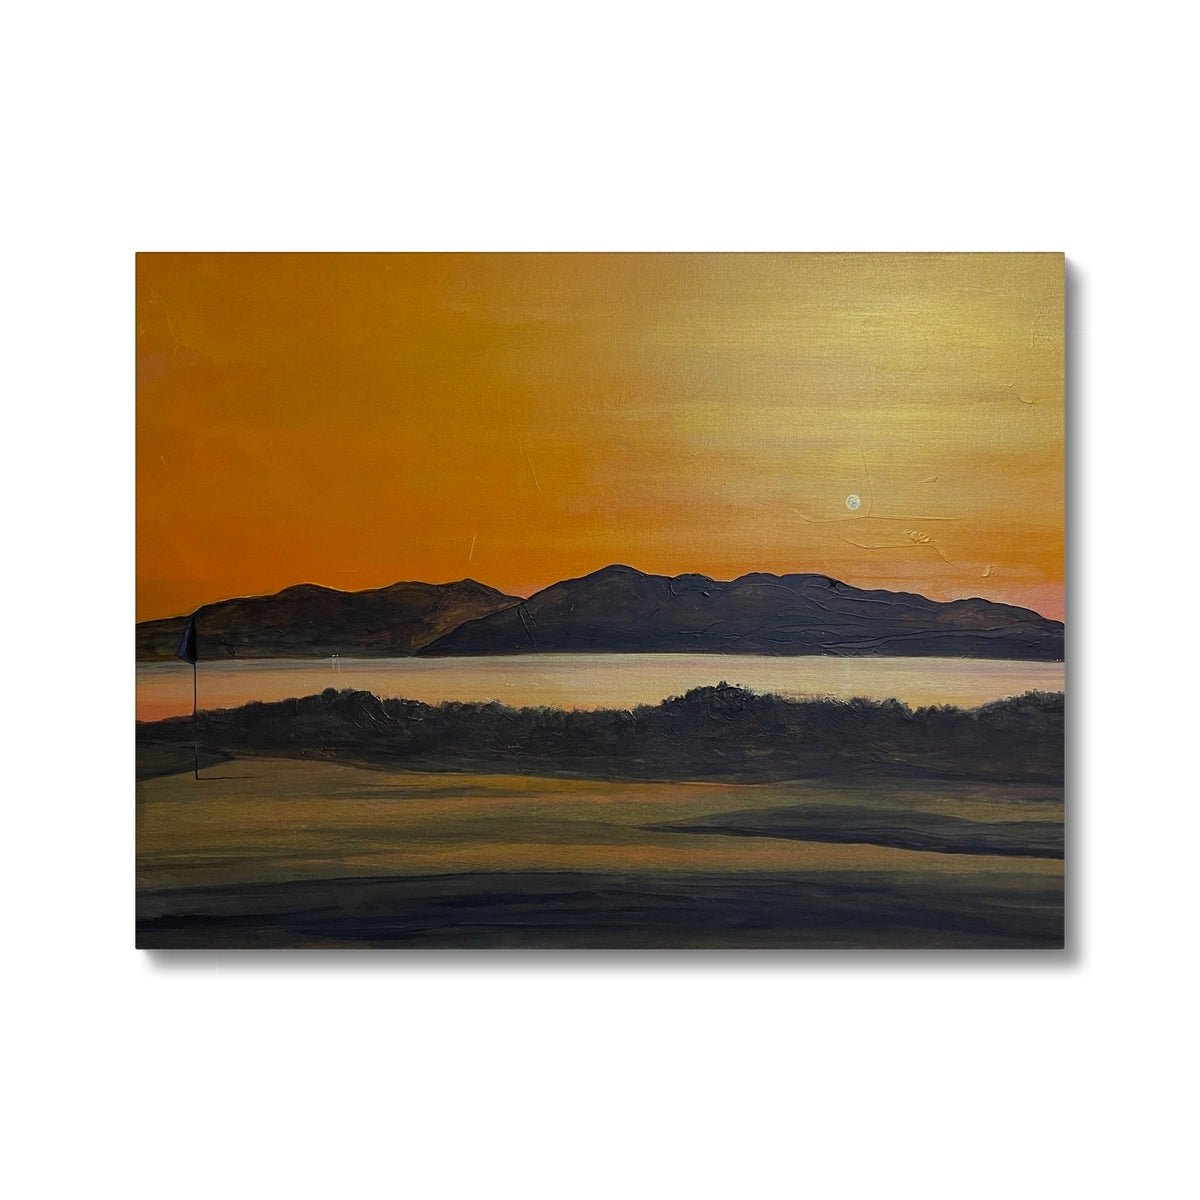 Arran & The 5th Green Royal Troon Golf Course Painting | Canvas From Scotland-Contemporary Stretched Canvas Prints-Arran Art Gallery-24"x18"-Paintings, Prints, Homeware, Art Gifts From Scotland By Scottish Artist Kevin Hunter